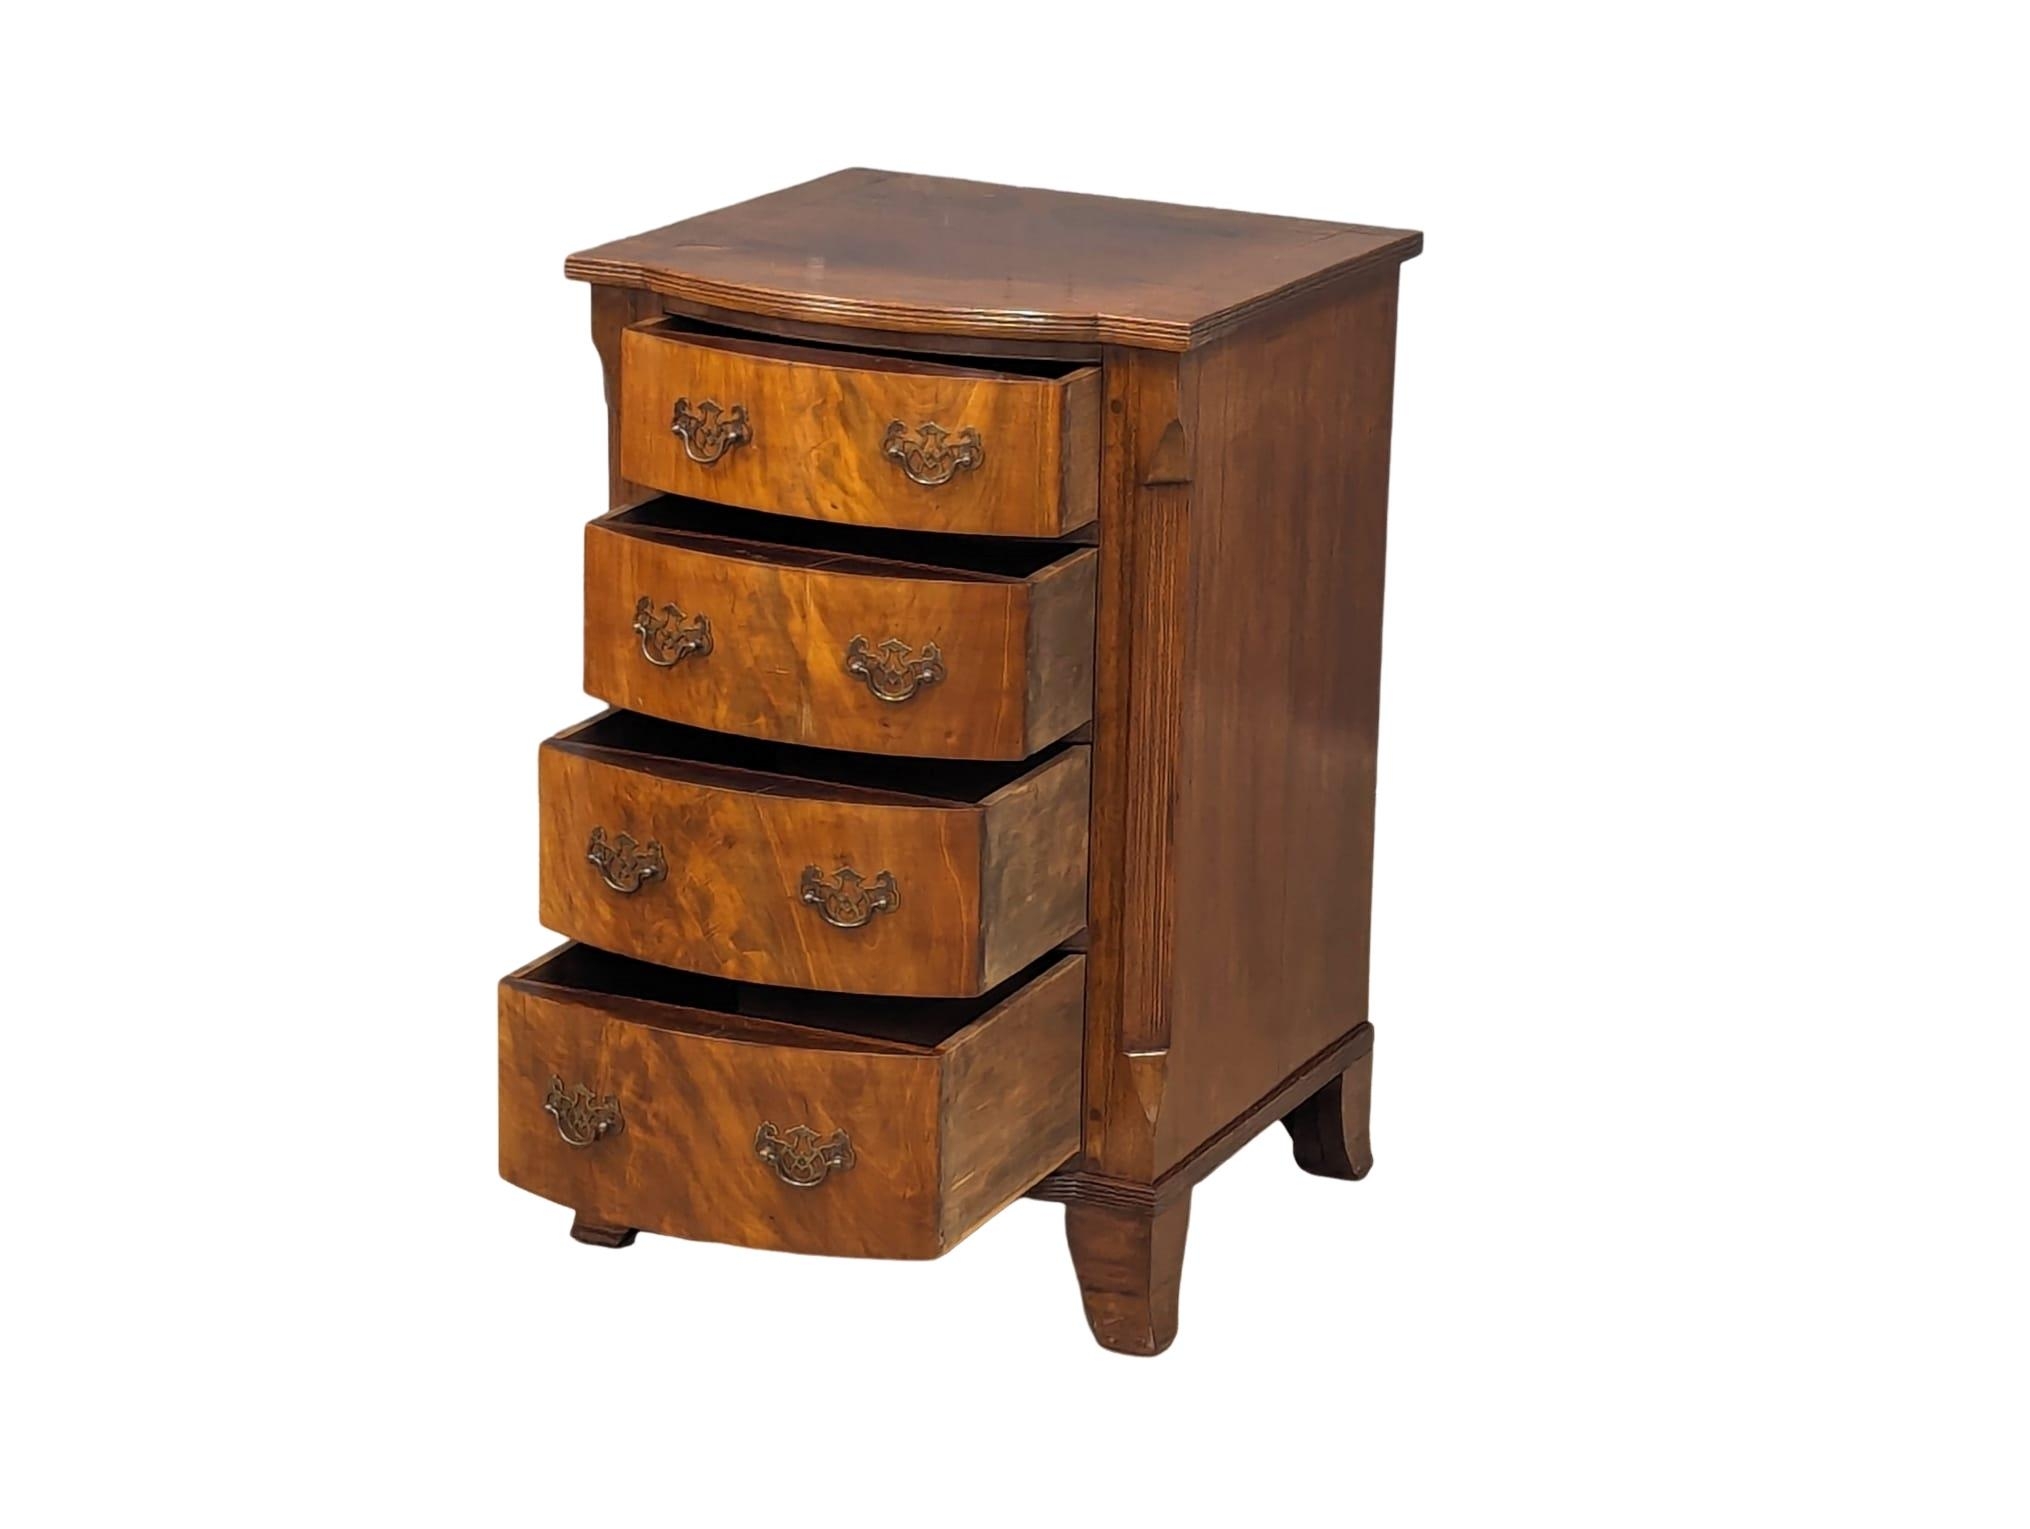 A vintage Georgian style mahogany Serpentine front chest of drawers. 50x51x78cm - Image 5 of 5